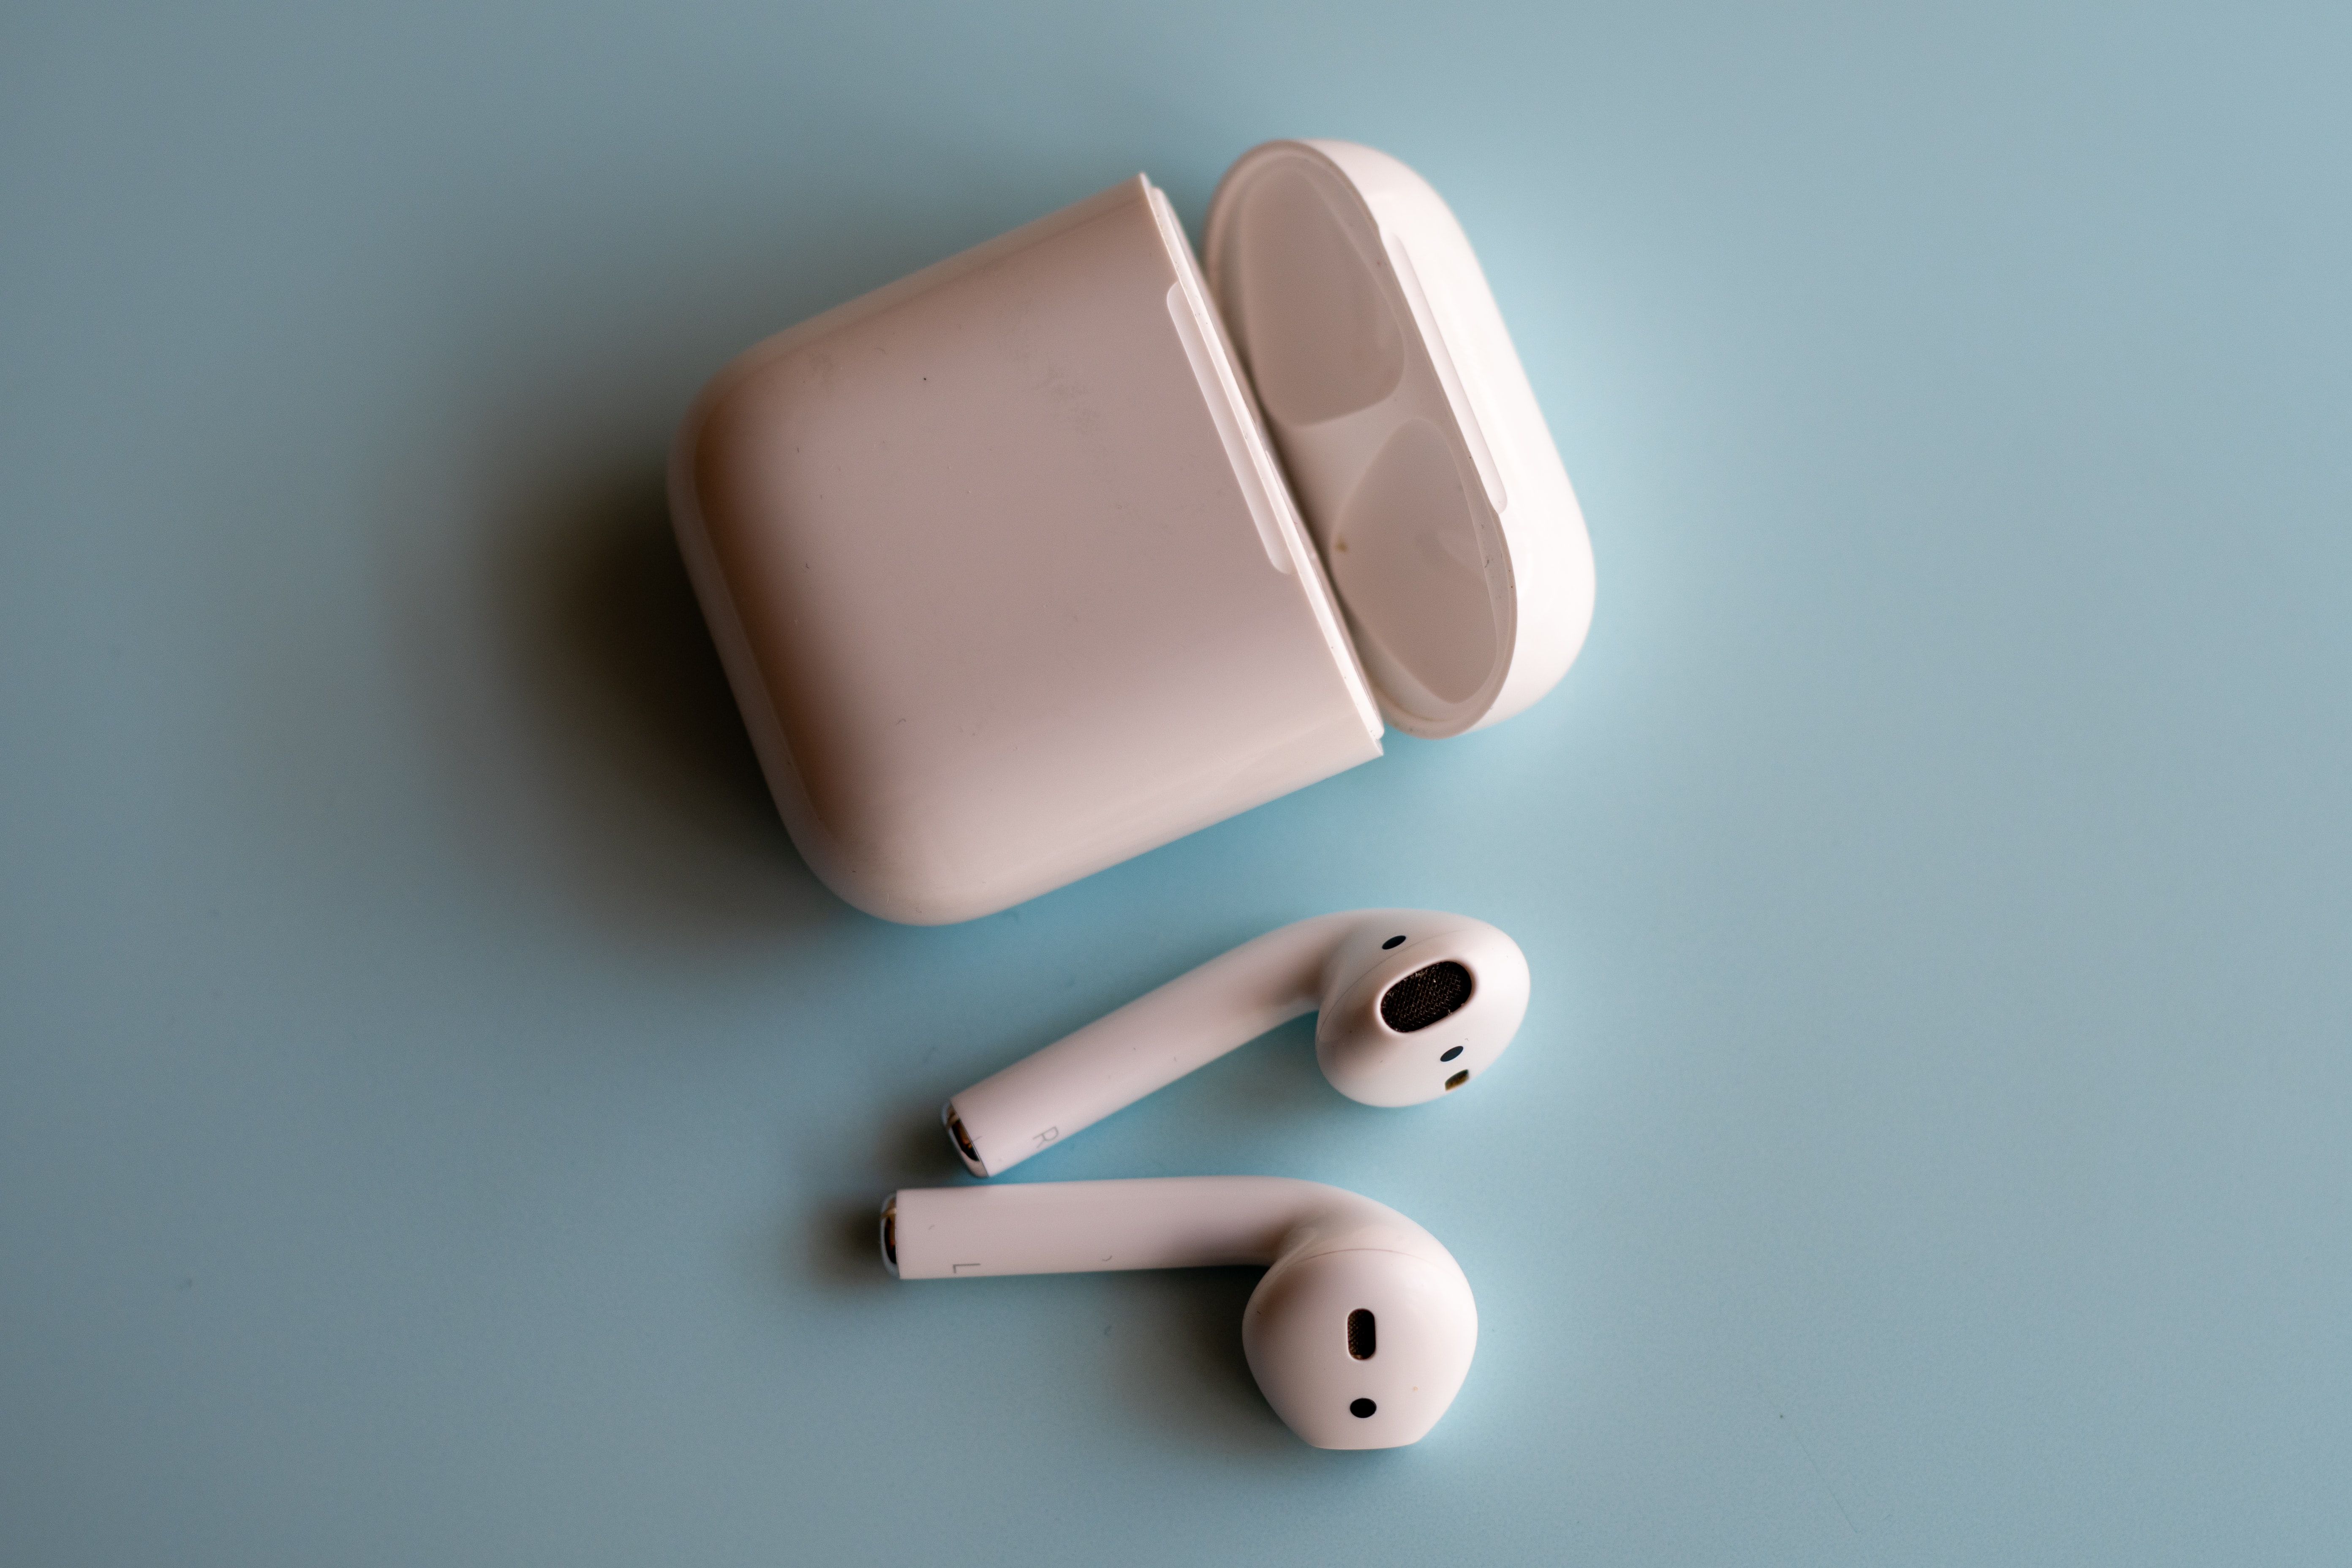 Prime Day AirPods deals bring prices to as low as 90